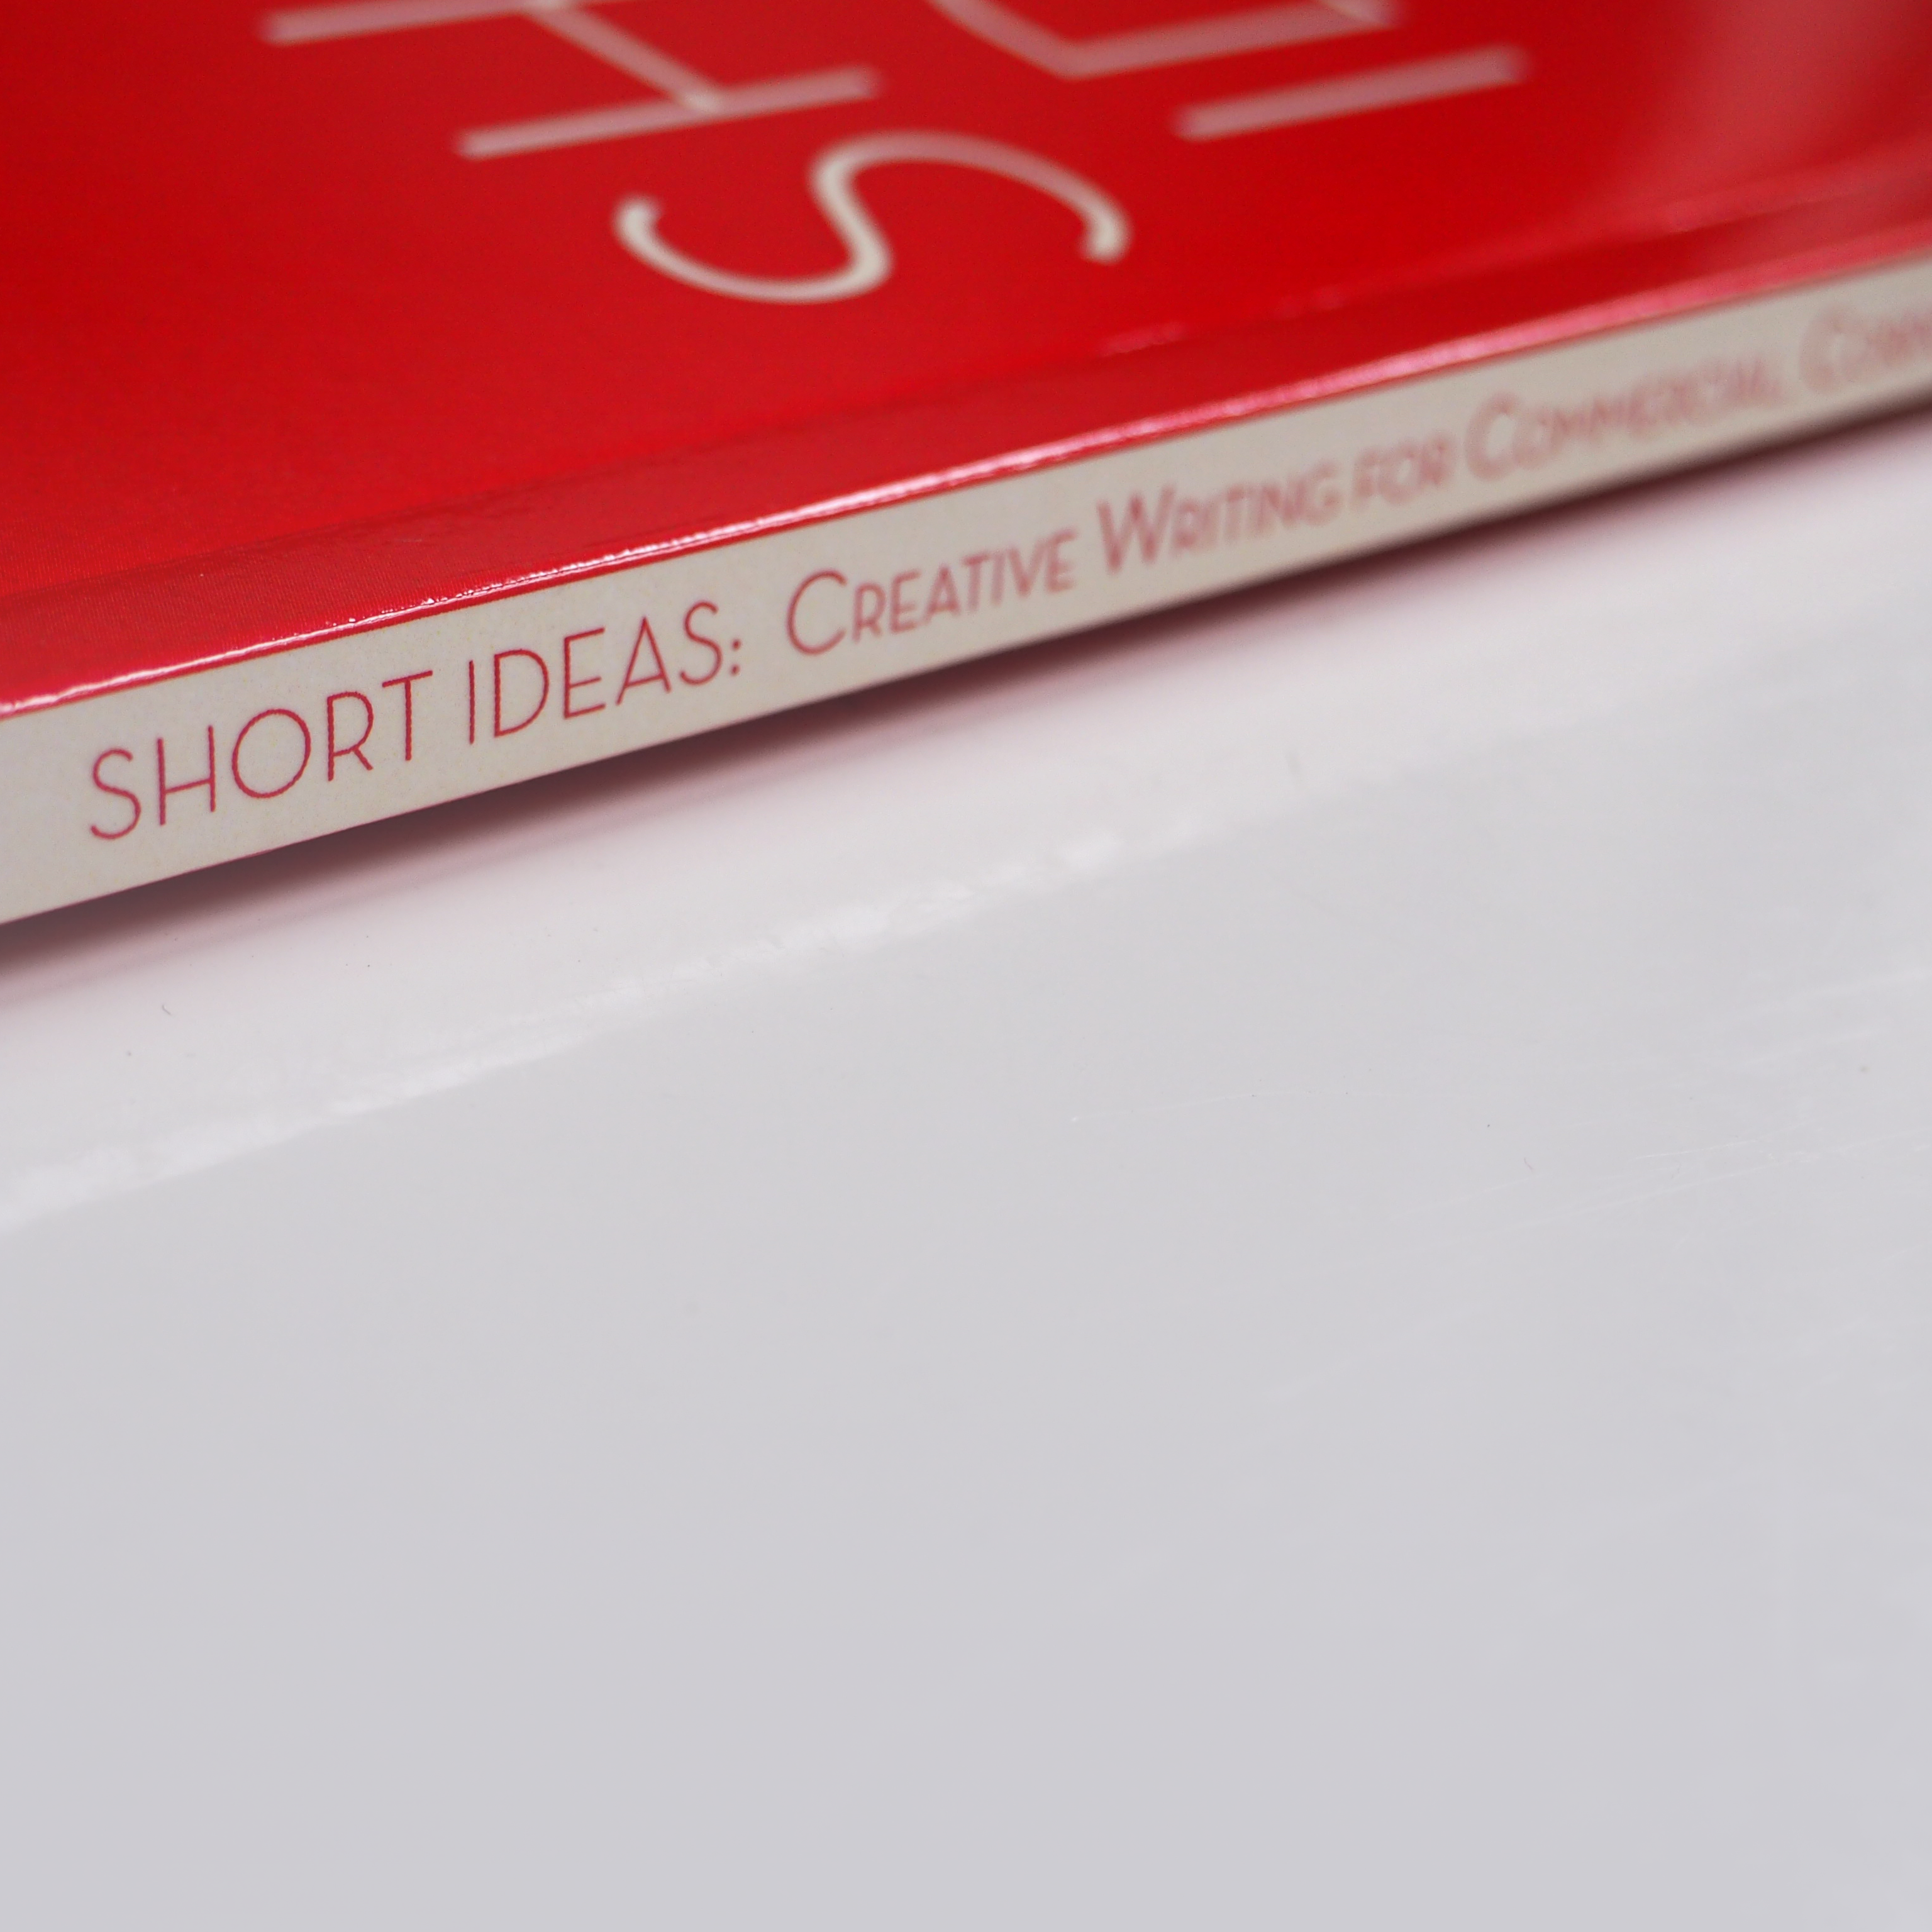 The “Short Ideas” Book Is Now For Sale